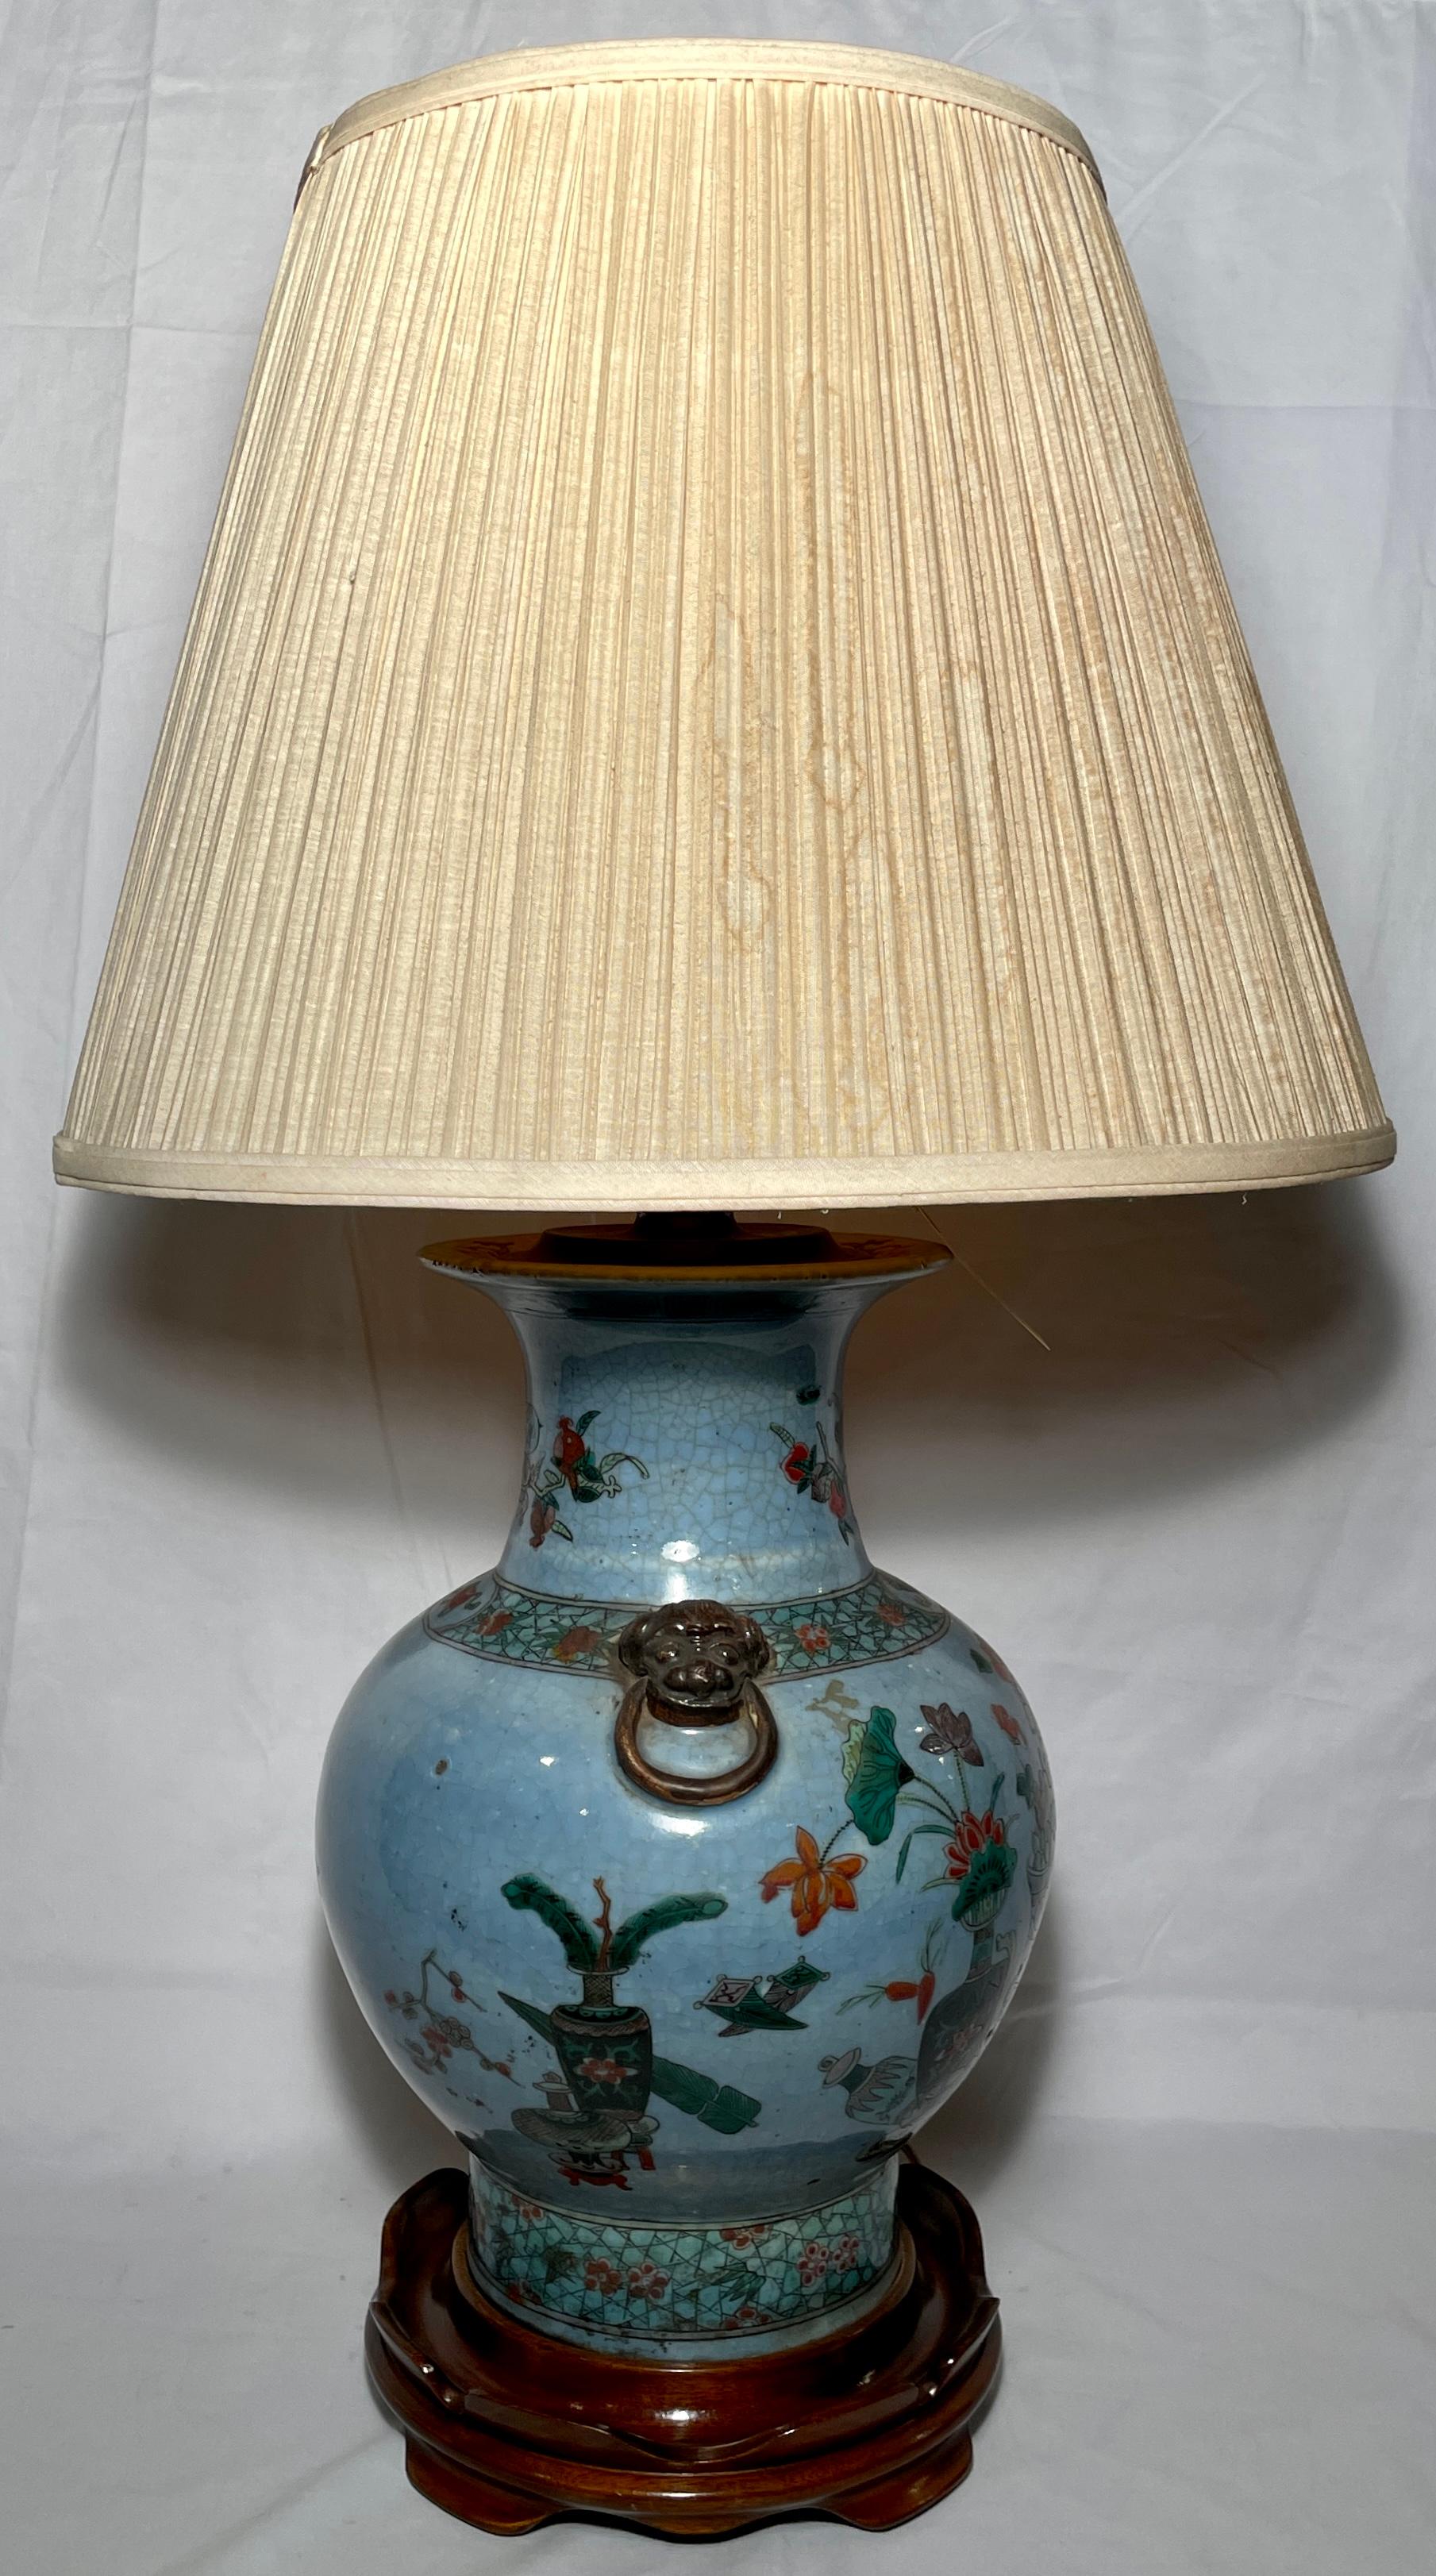 Antique late 19th century Chinese porcelain vase which was later converted into lamp on a custom made mahogany base. 
Measurements:
Lamp shade- 18.25 inches in diameter 
Body- 10 inches in diameter 
Base- 9 inches in diameter.